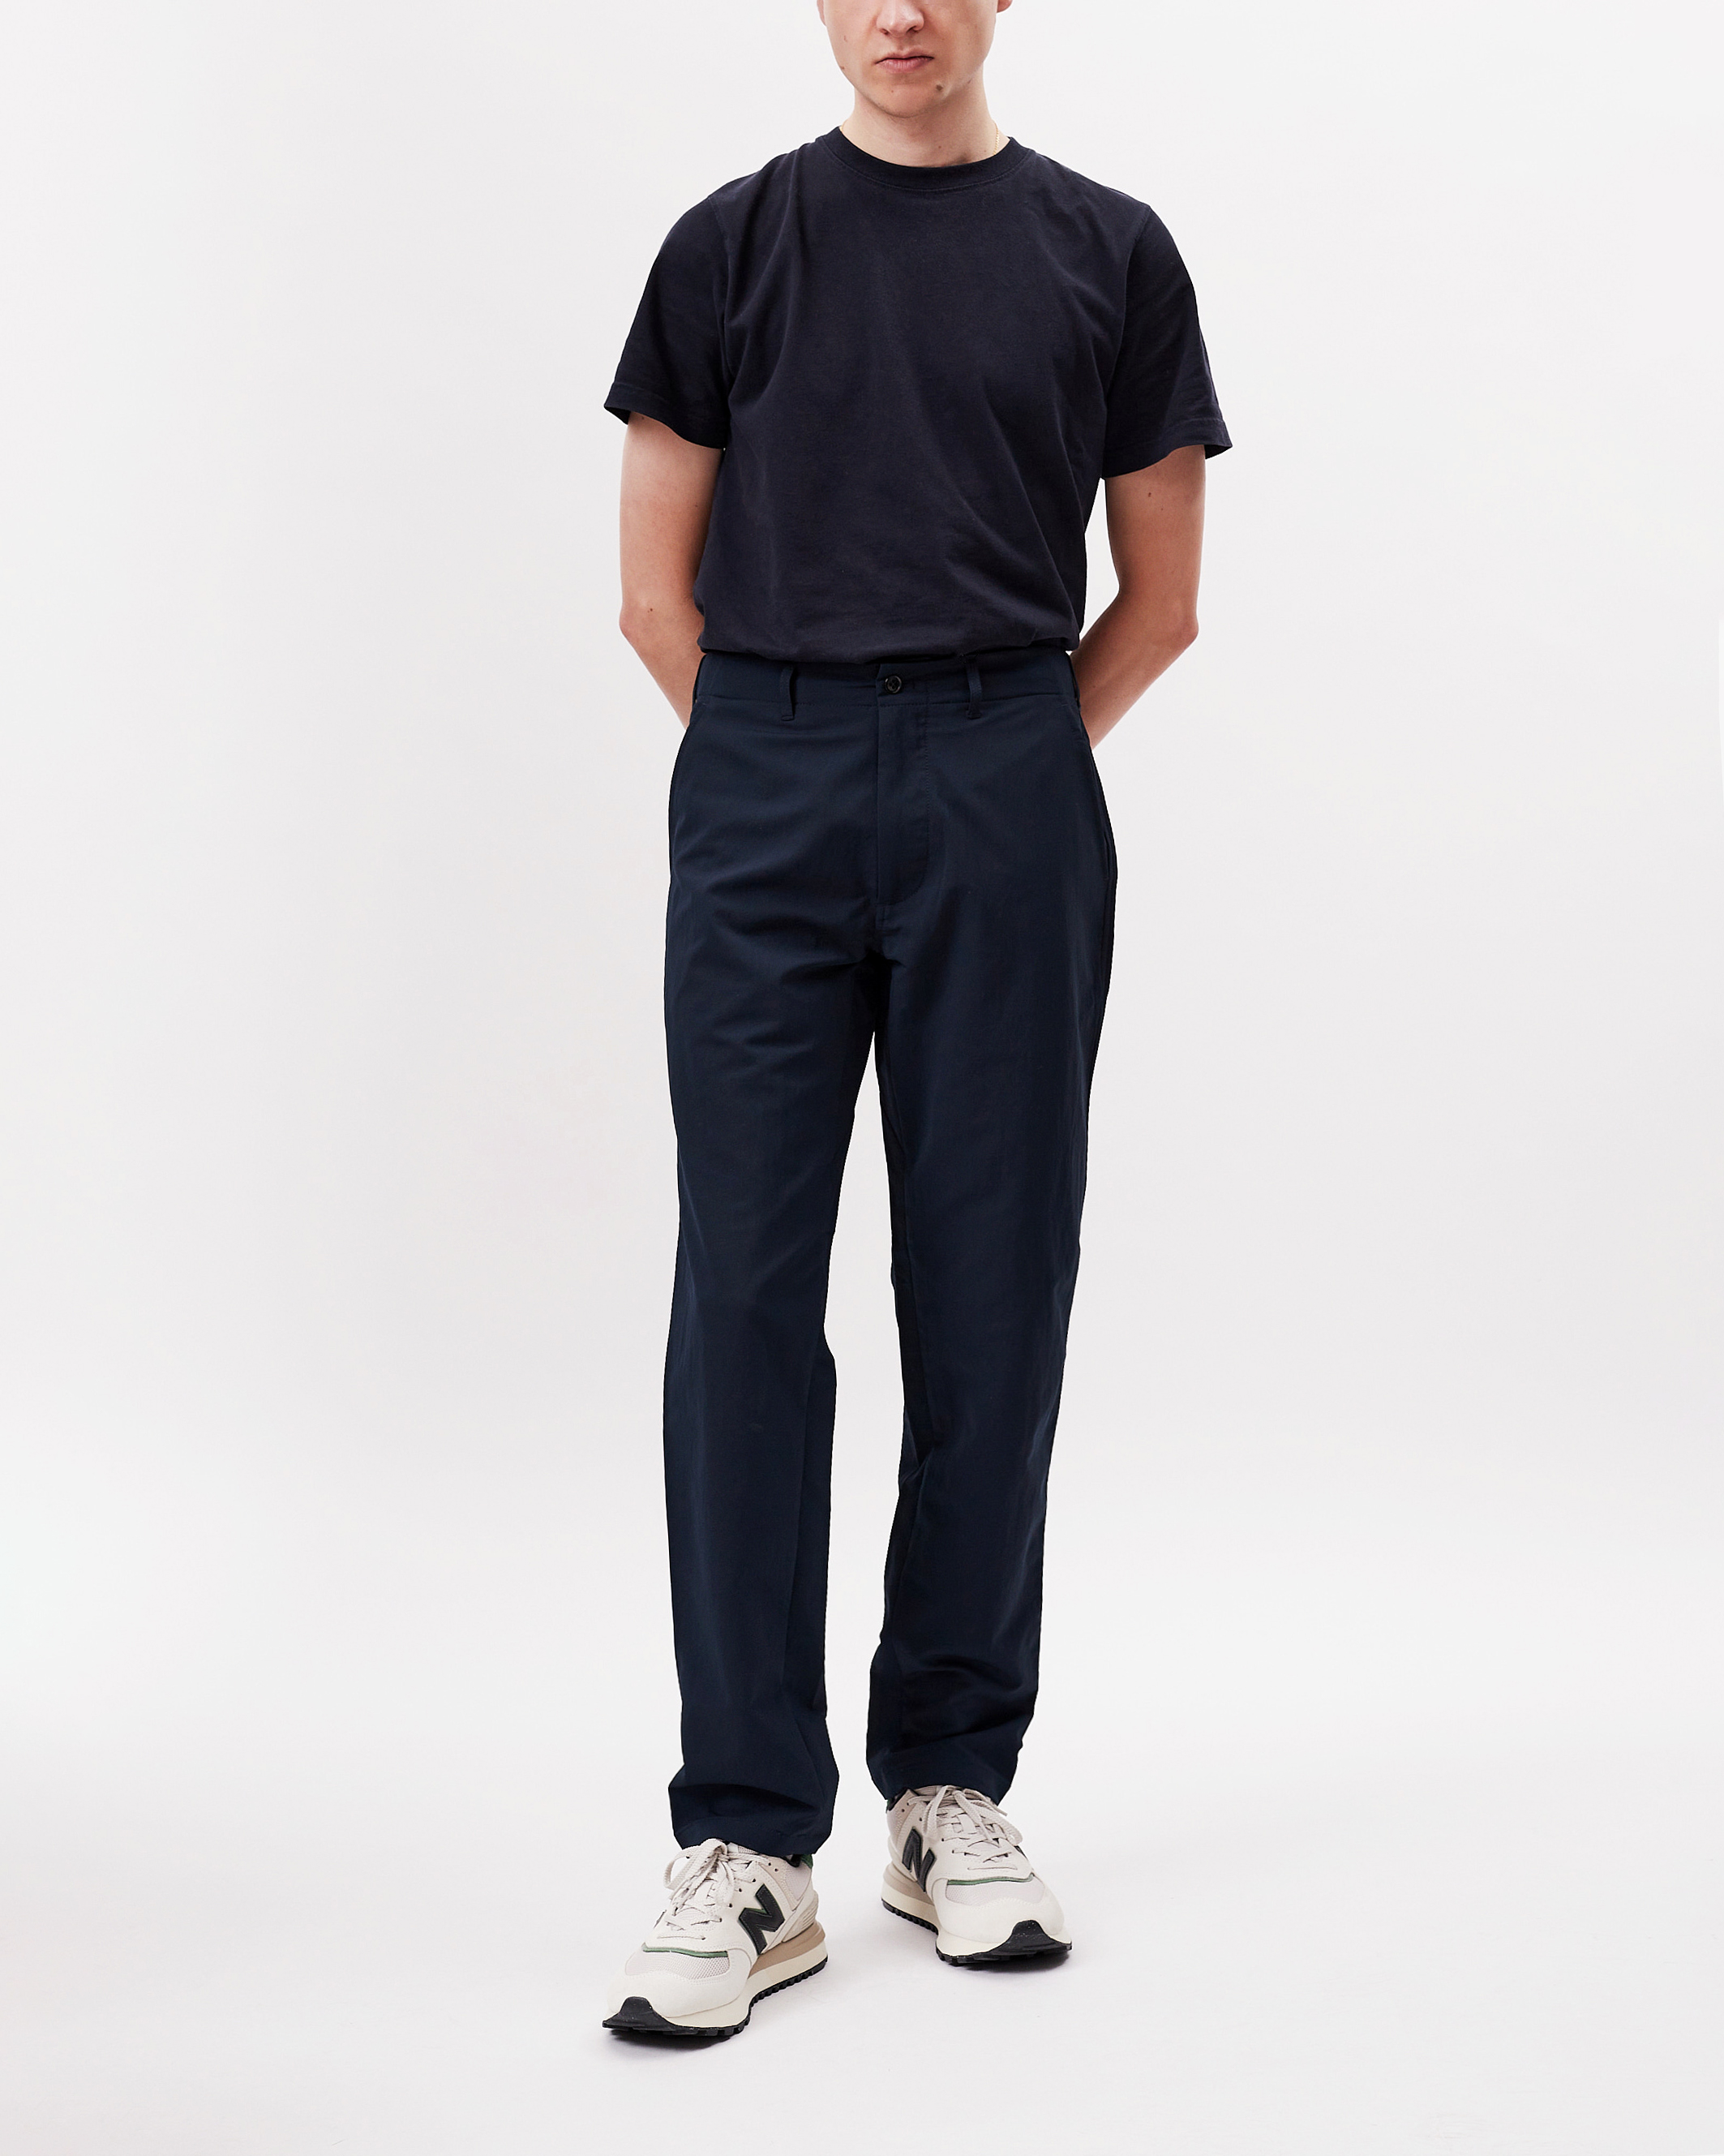 Norse Store | Shipping Worldwide - nanamica ALPHADRY Club Pants - Navy